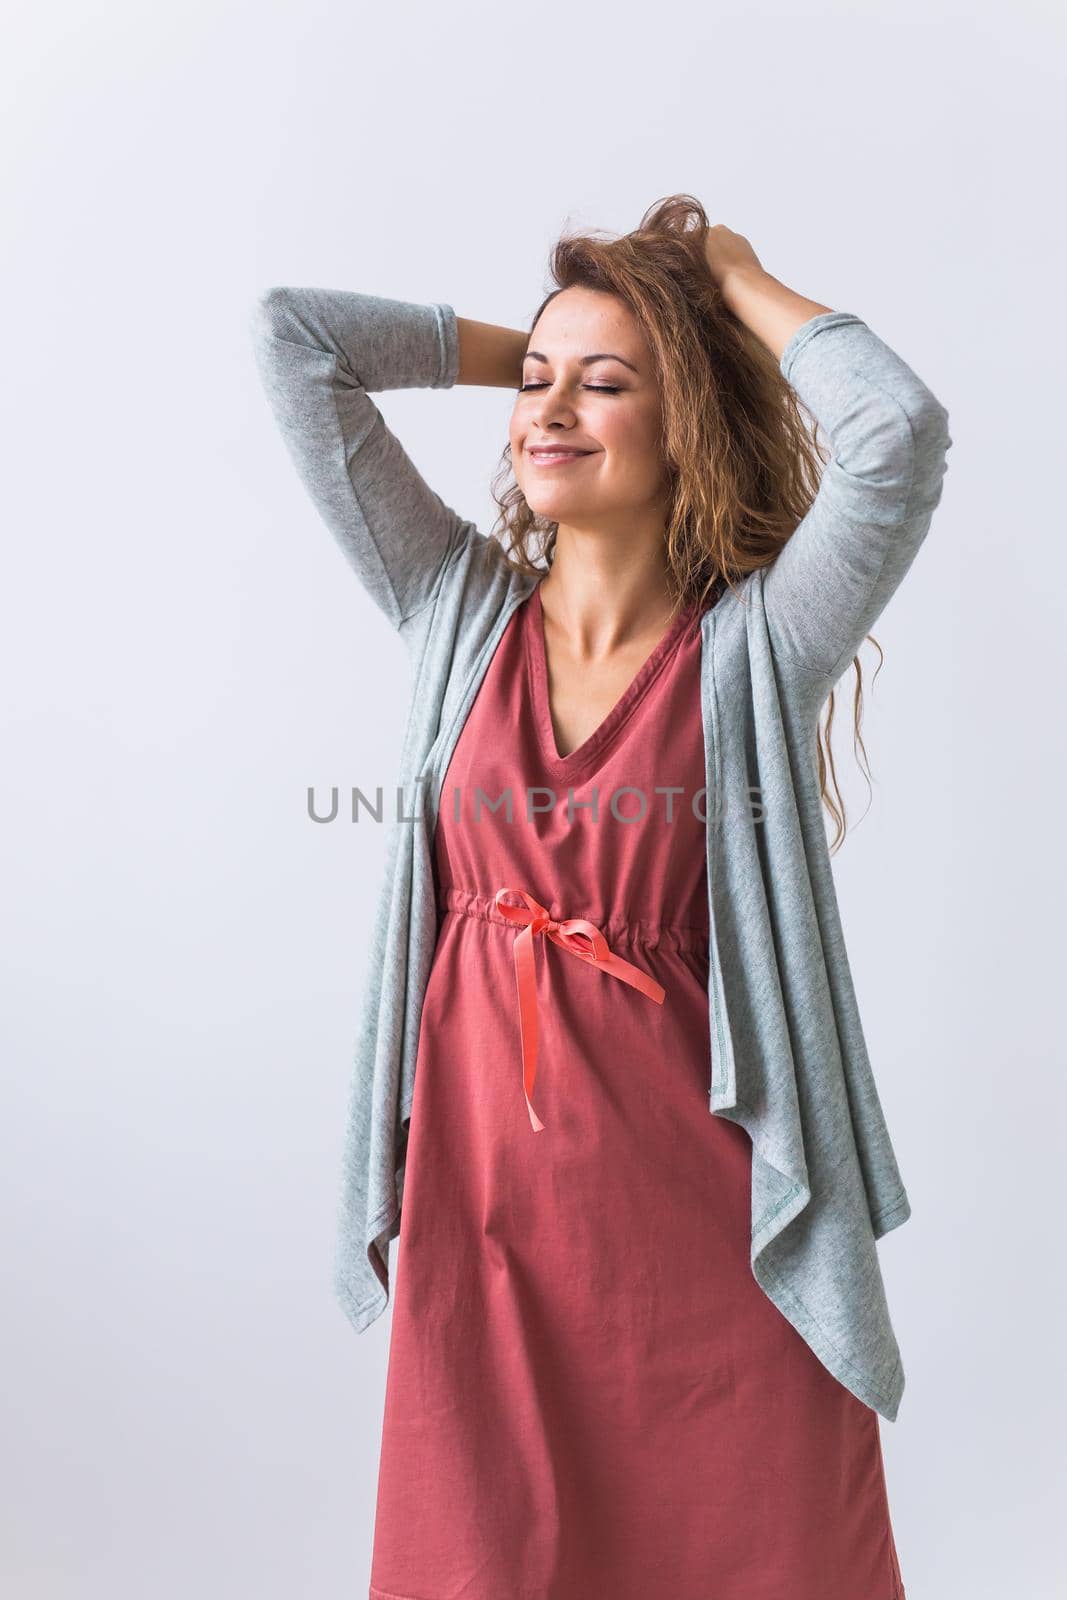 Beautiful young woman smiling against white background. Comfortable homewear, home relaxation and female fashion.